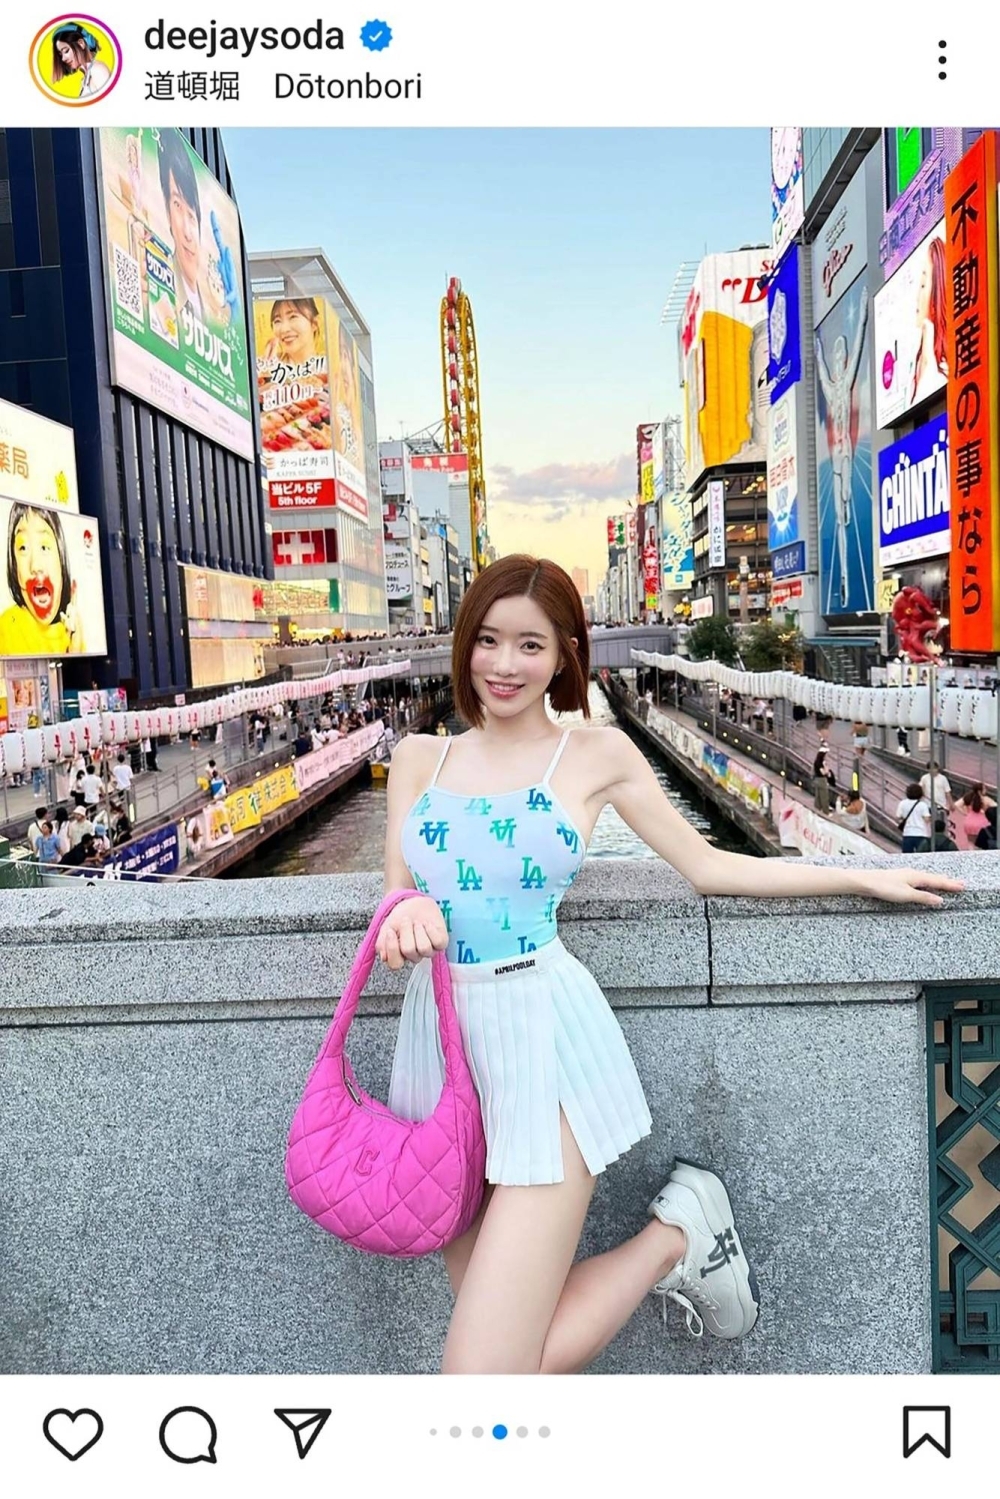 Photo taken from DJ Soda's Instagram shows her during a visit to Osaka. 